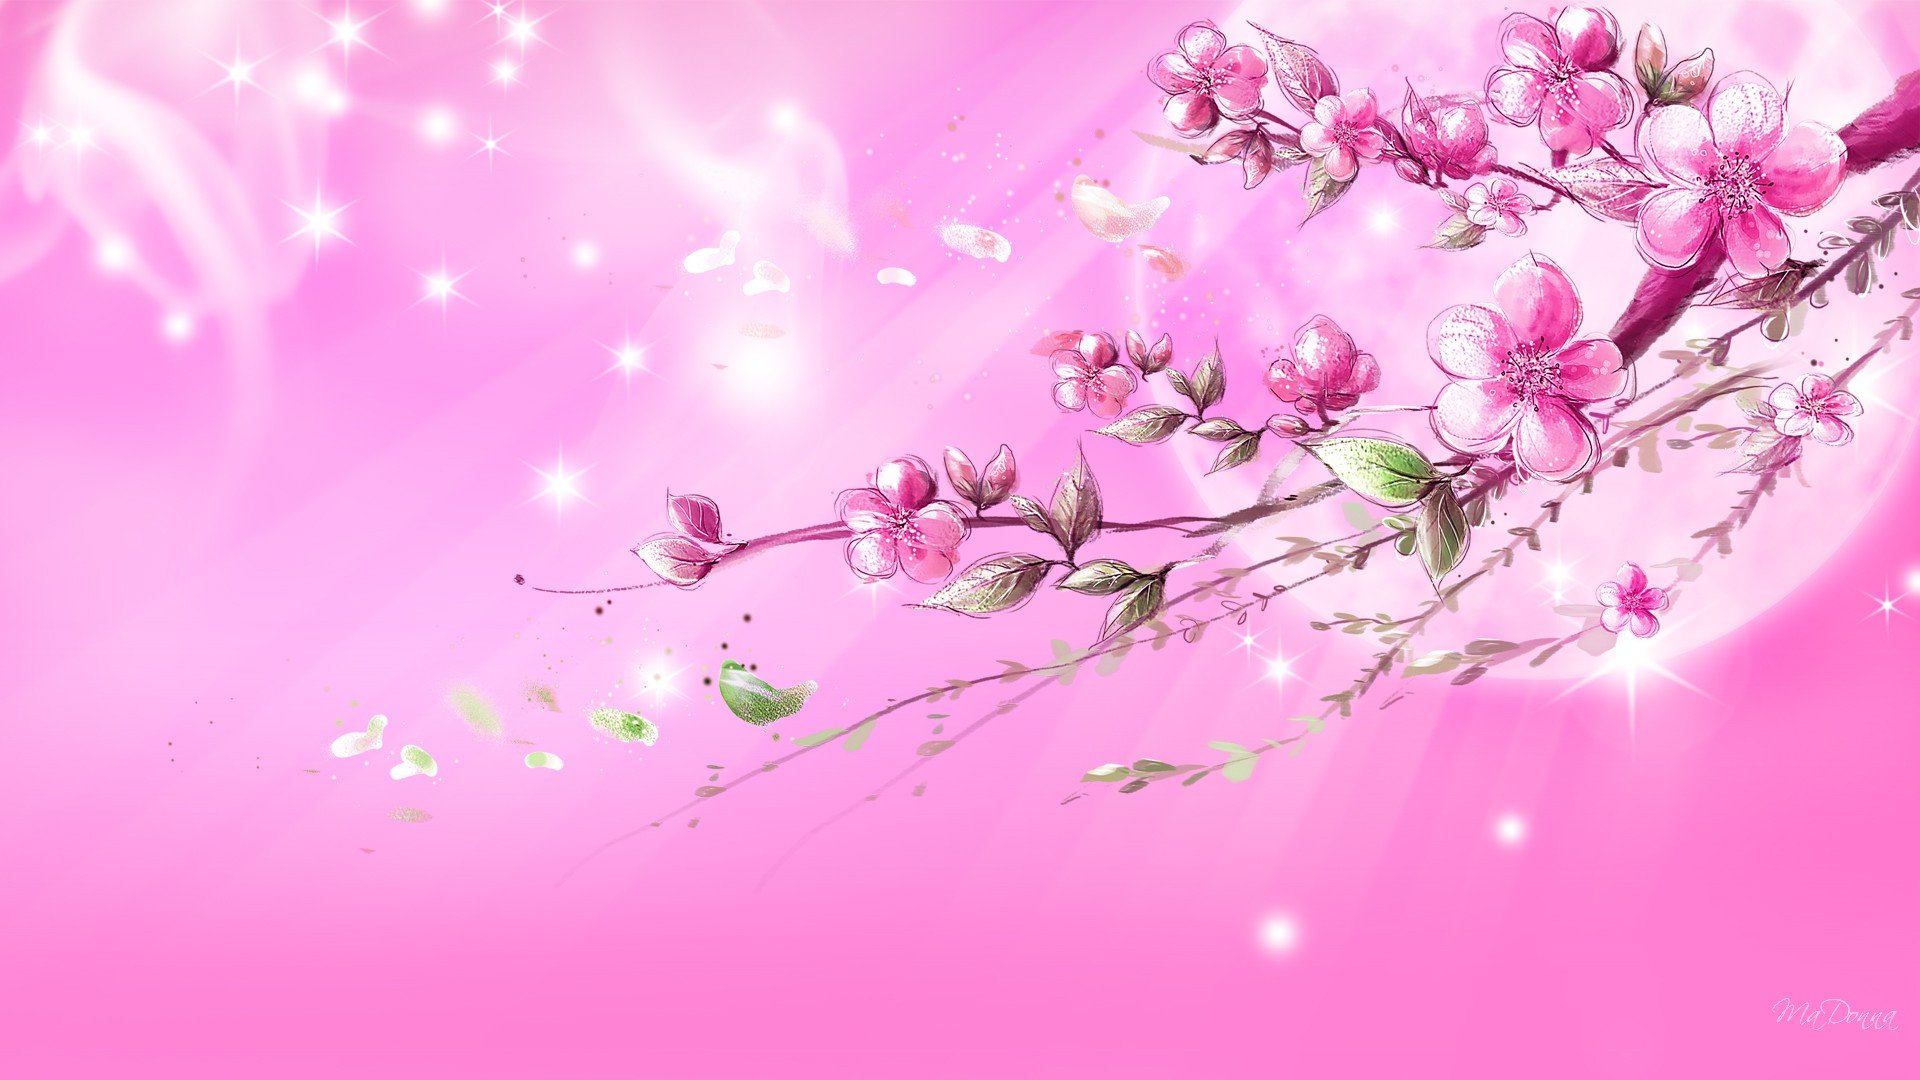 40 Cool Pink Wallpapers for Your Desktop 1920x1080